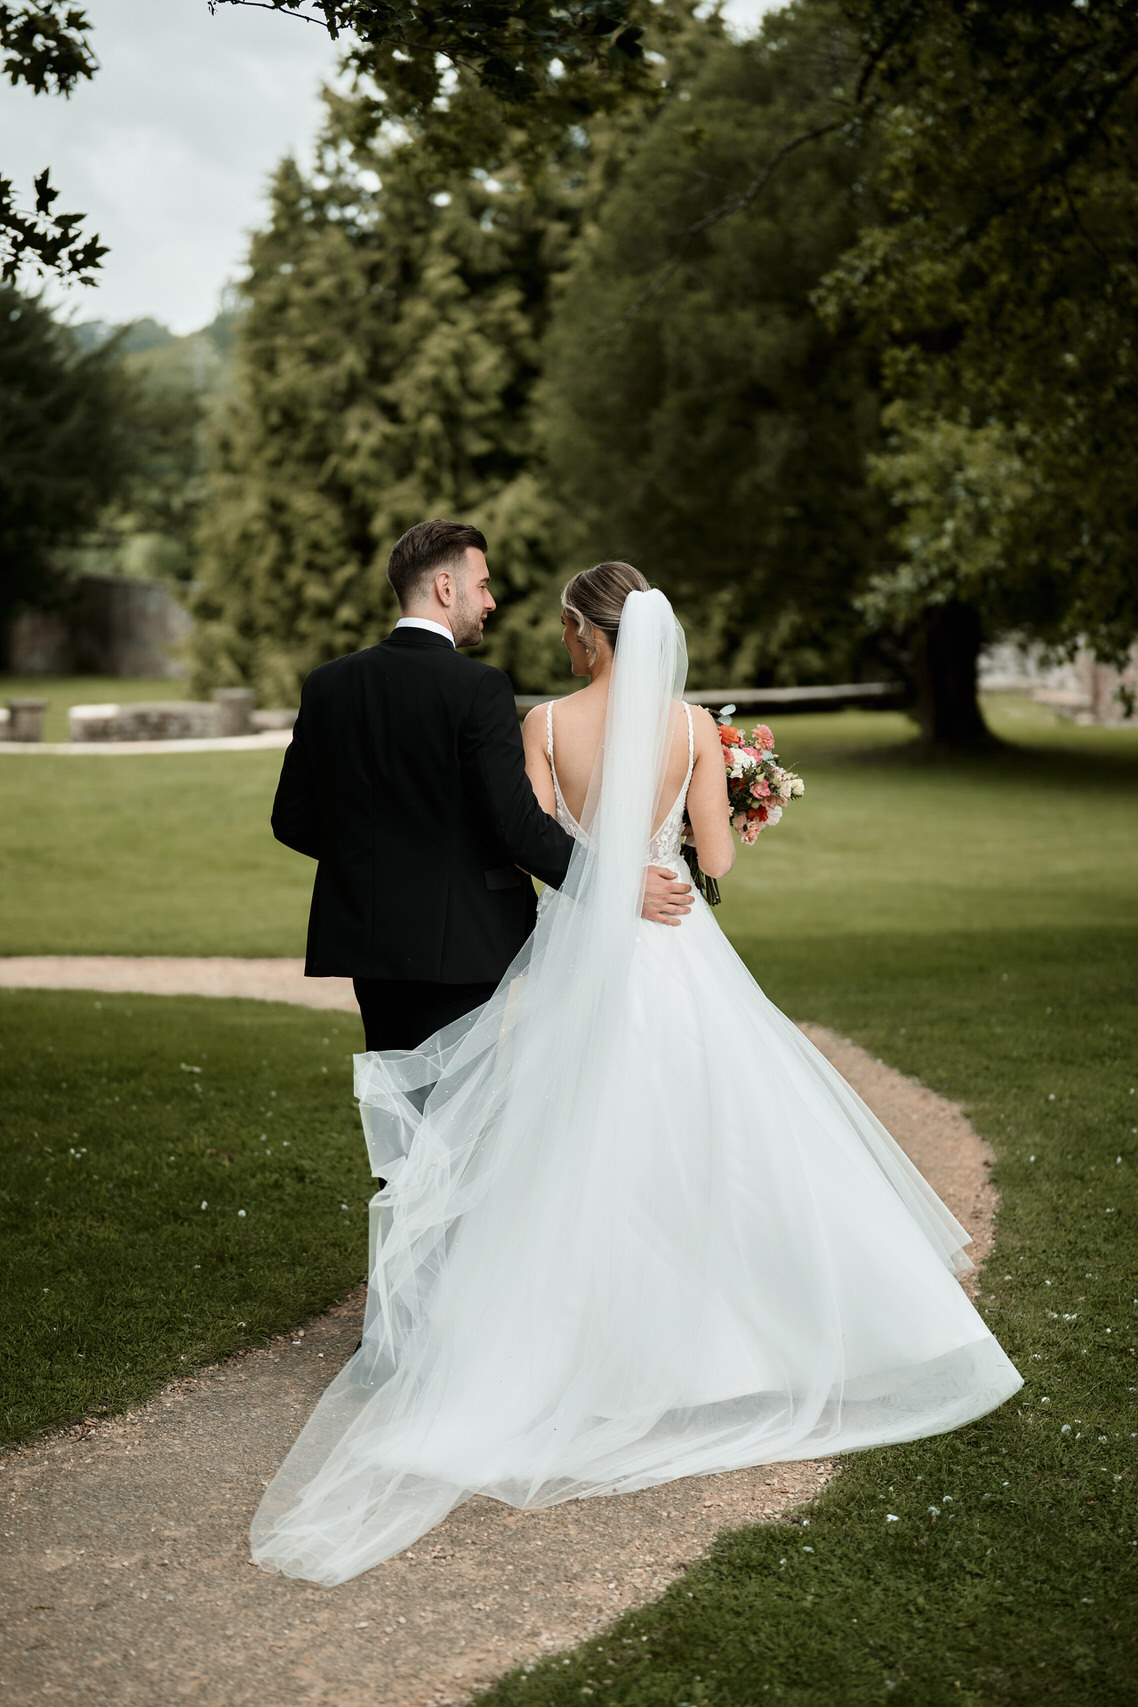 A bride and groom walking down a path in a park.